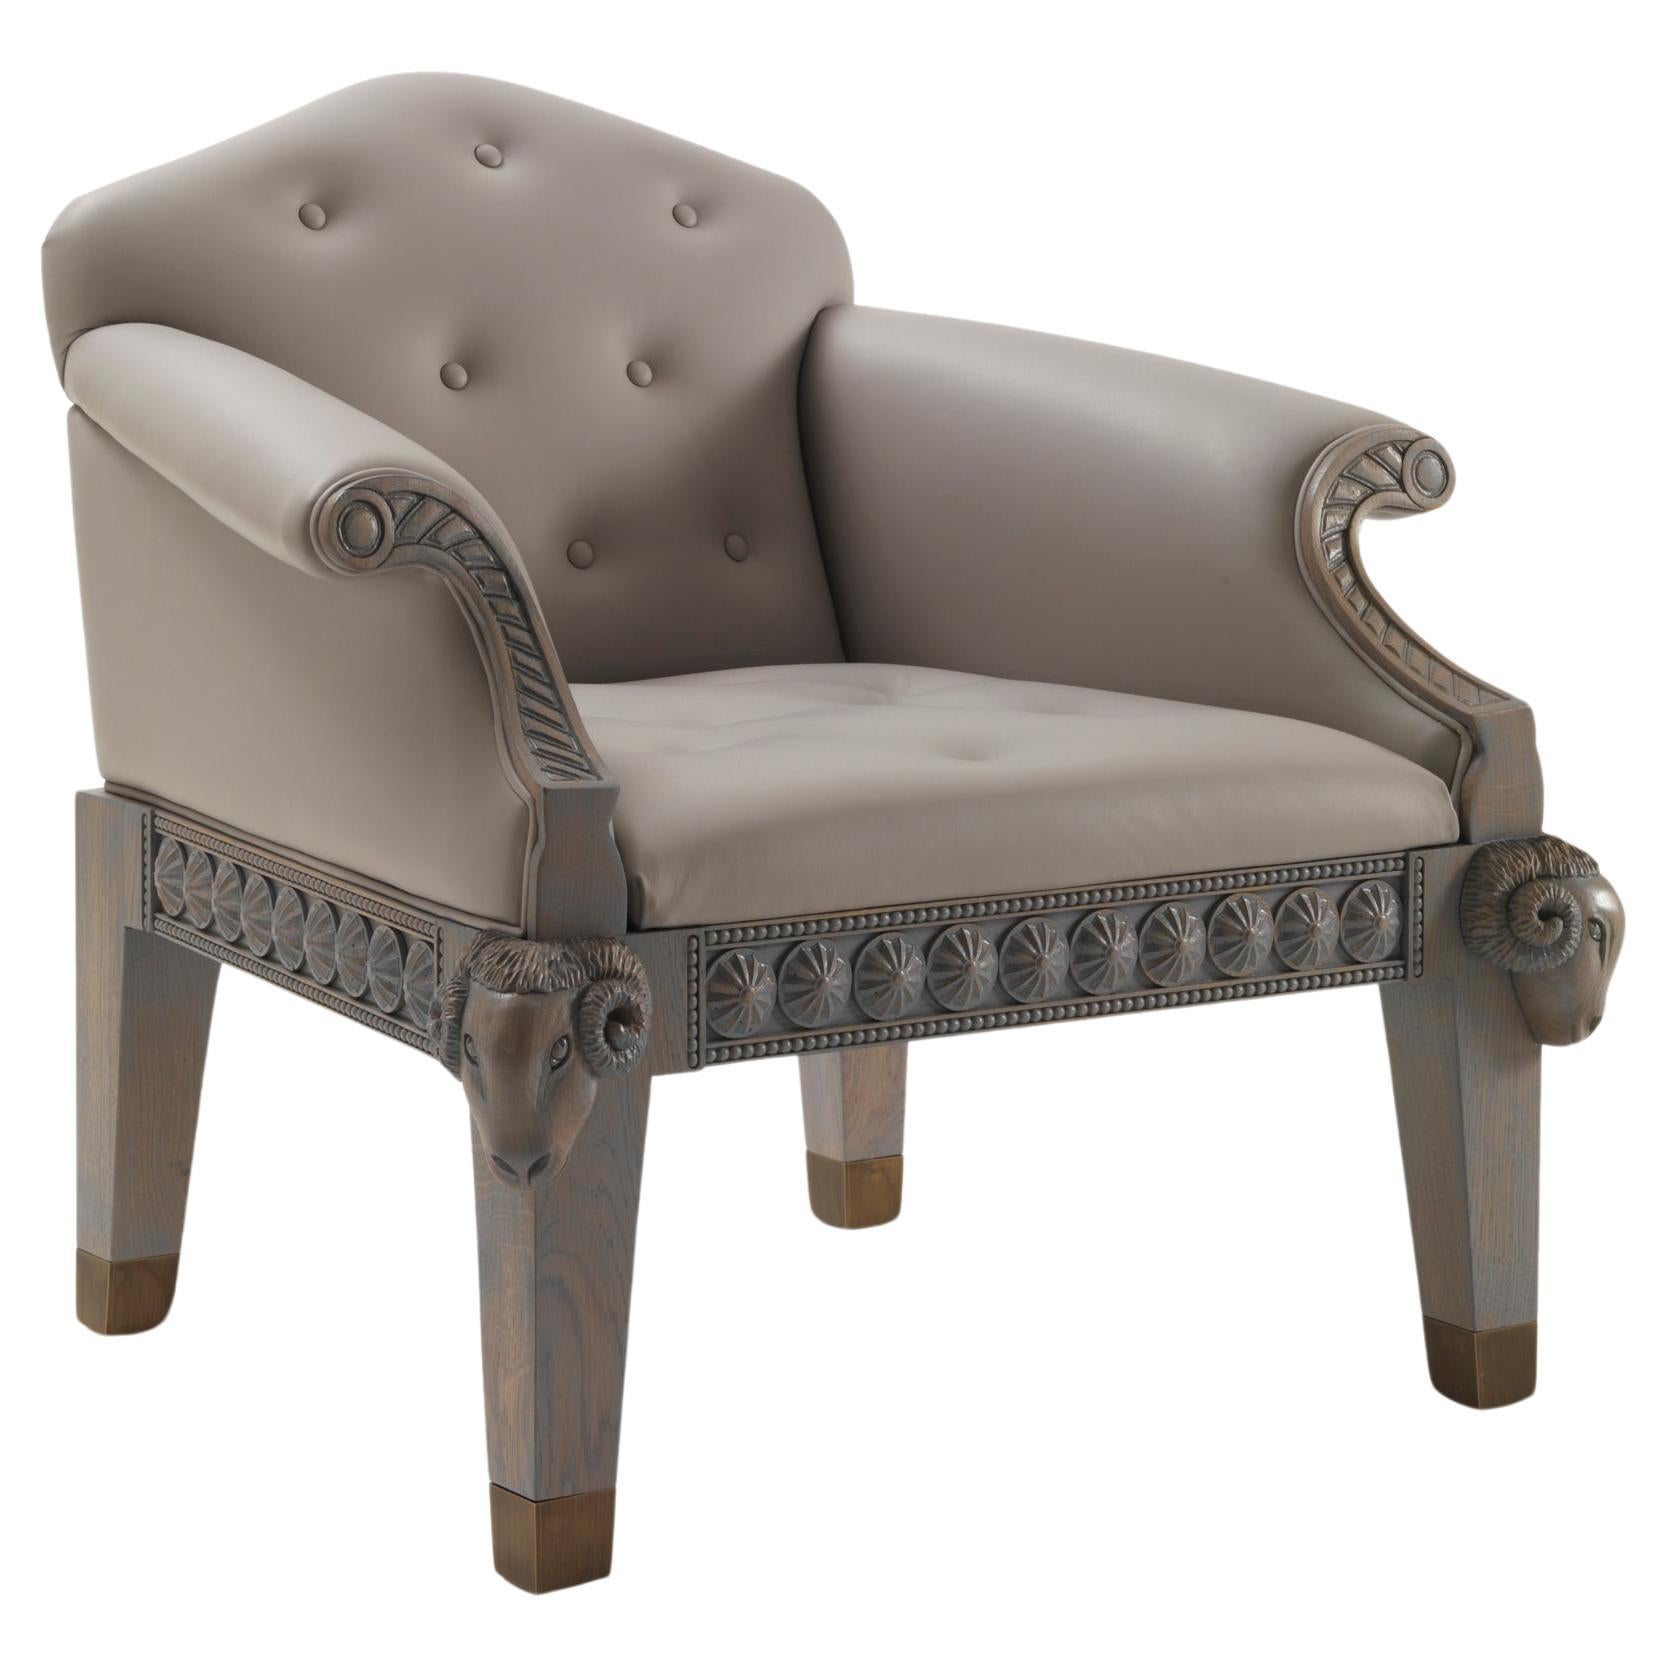 Formidable Beast Gray Oak Armchair with Buttons - Wooden Rams and Tips